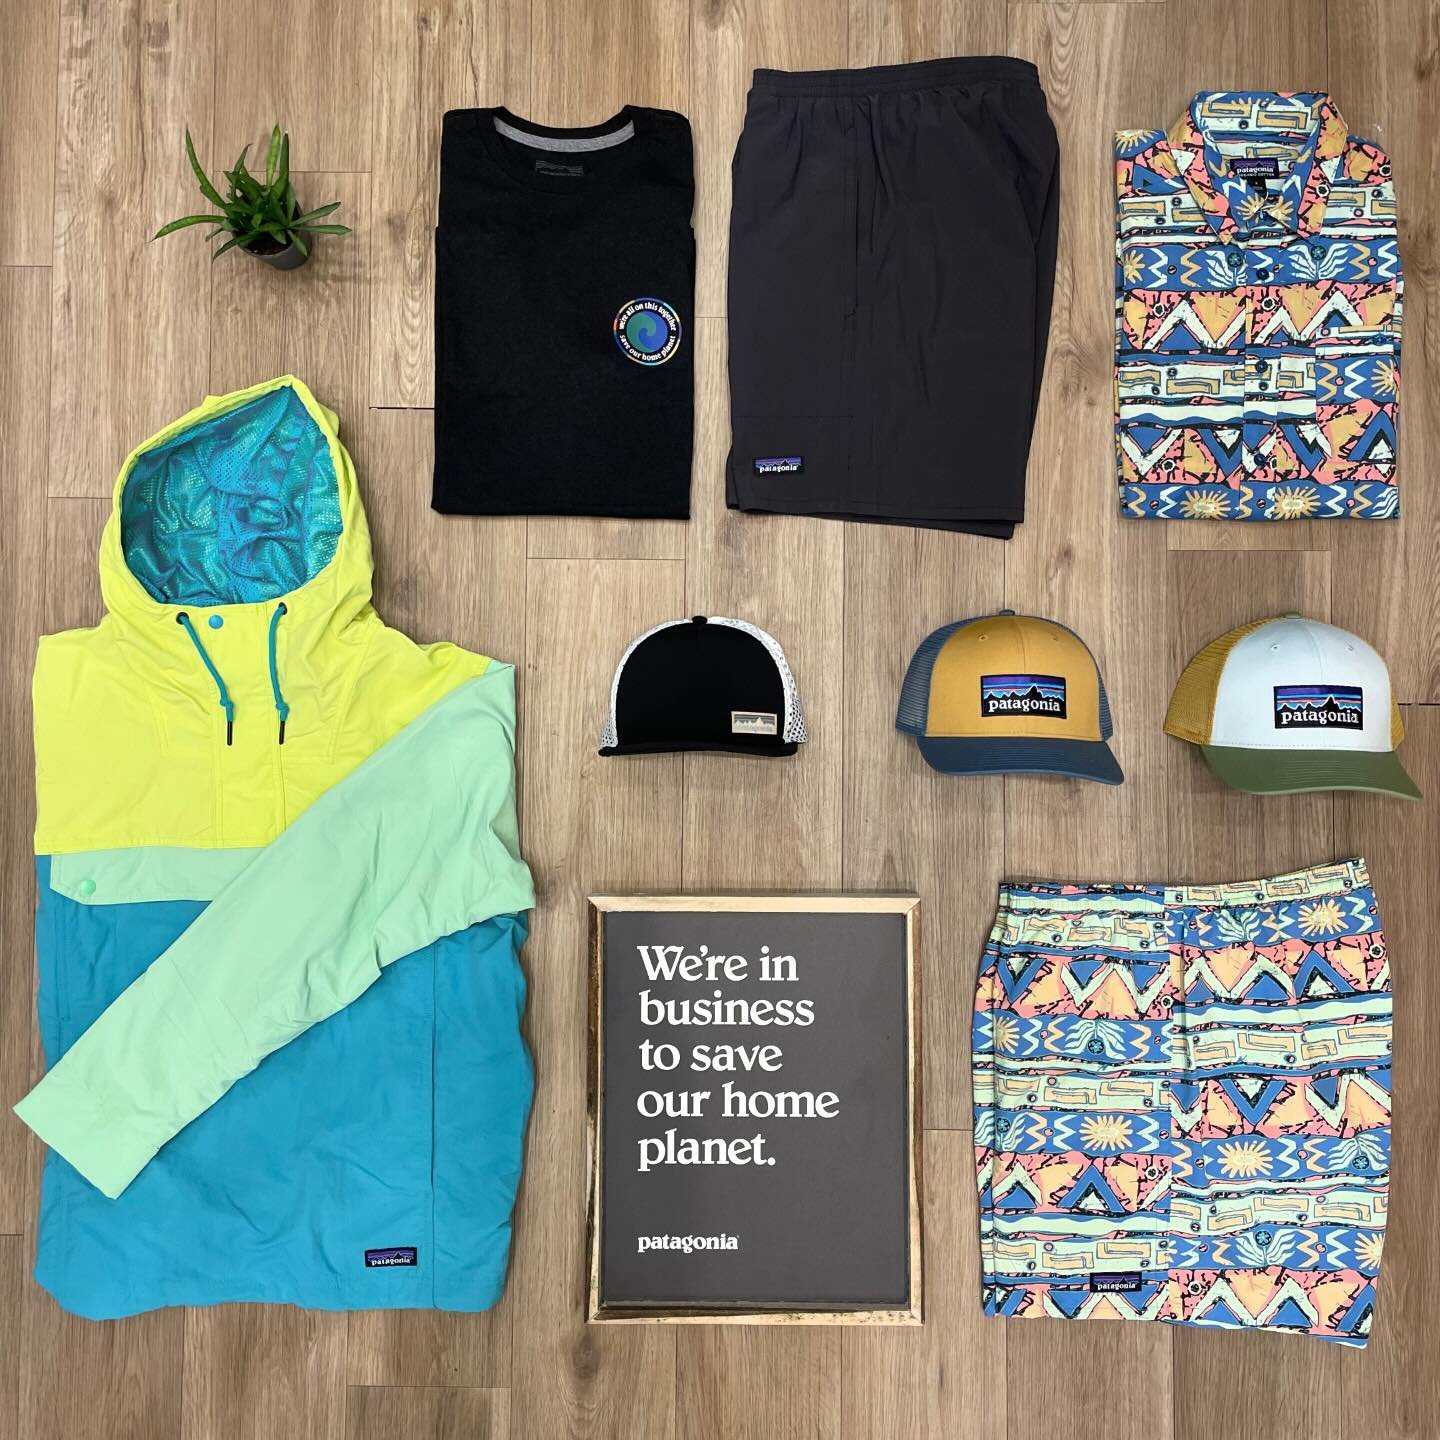 always down for some good products! 

the new @patagonia collection is now a available. 

#altonpremiumboardstore #patagonia #feldkirch #newcollection